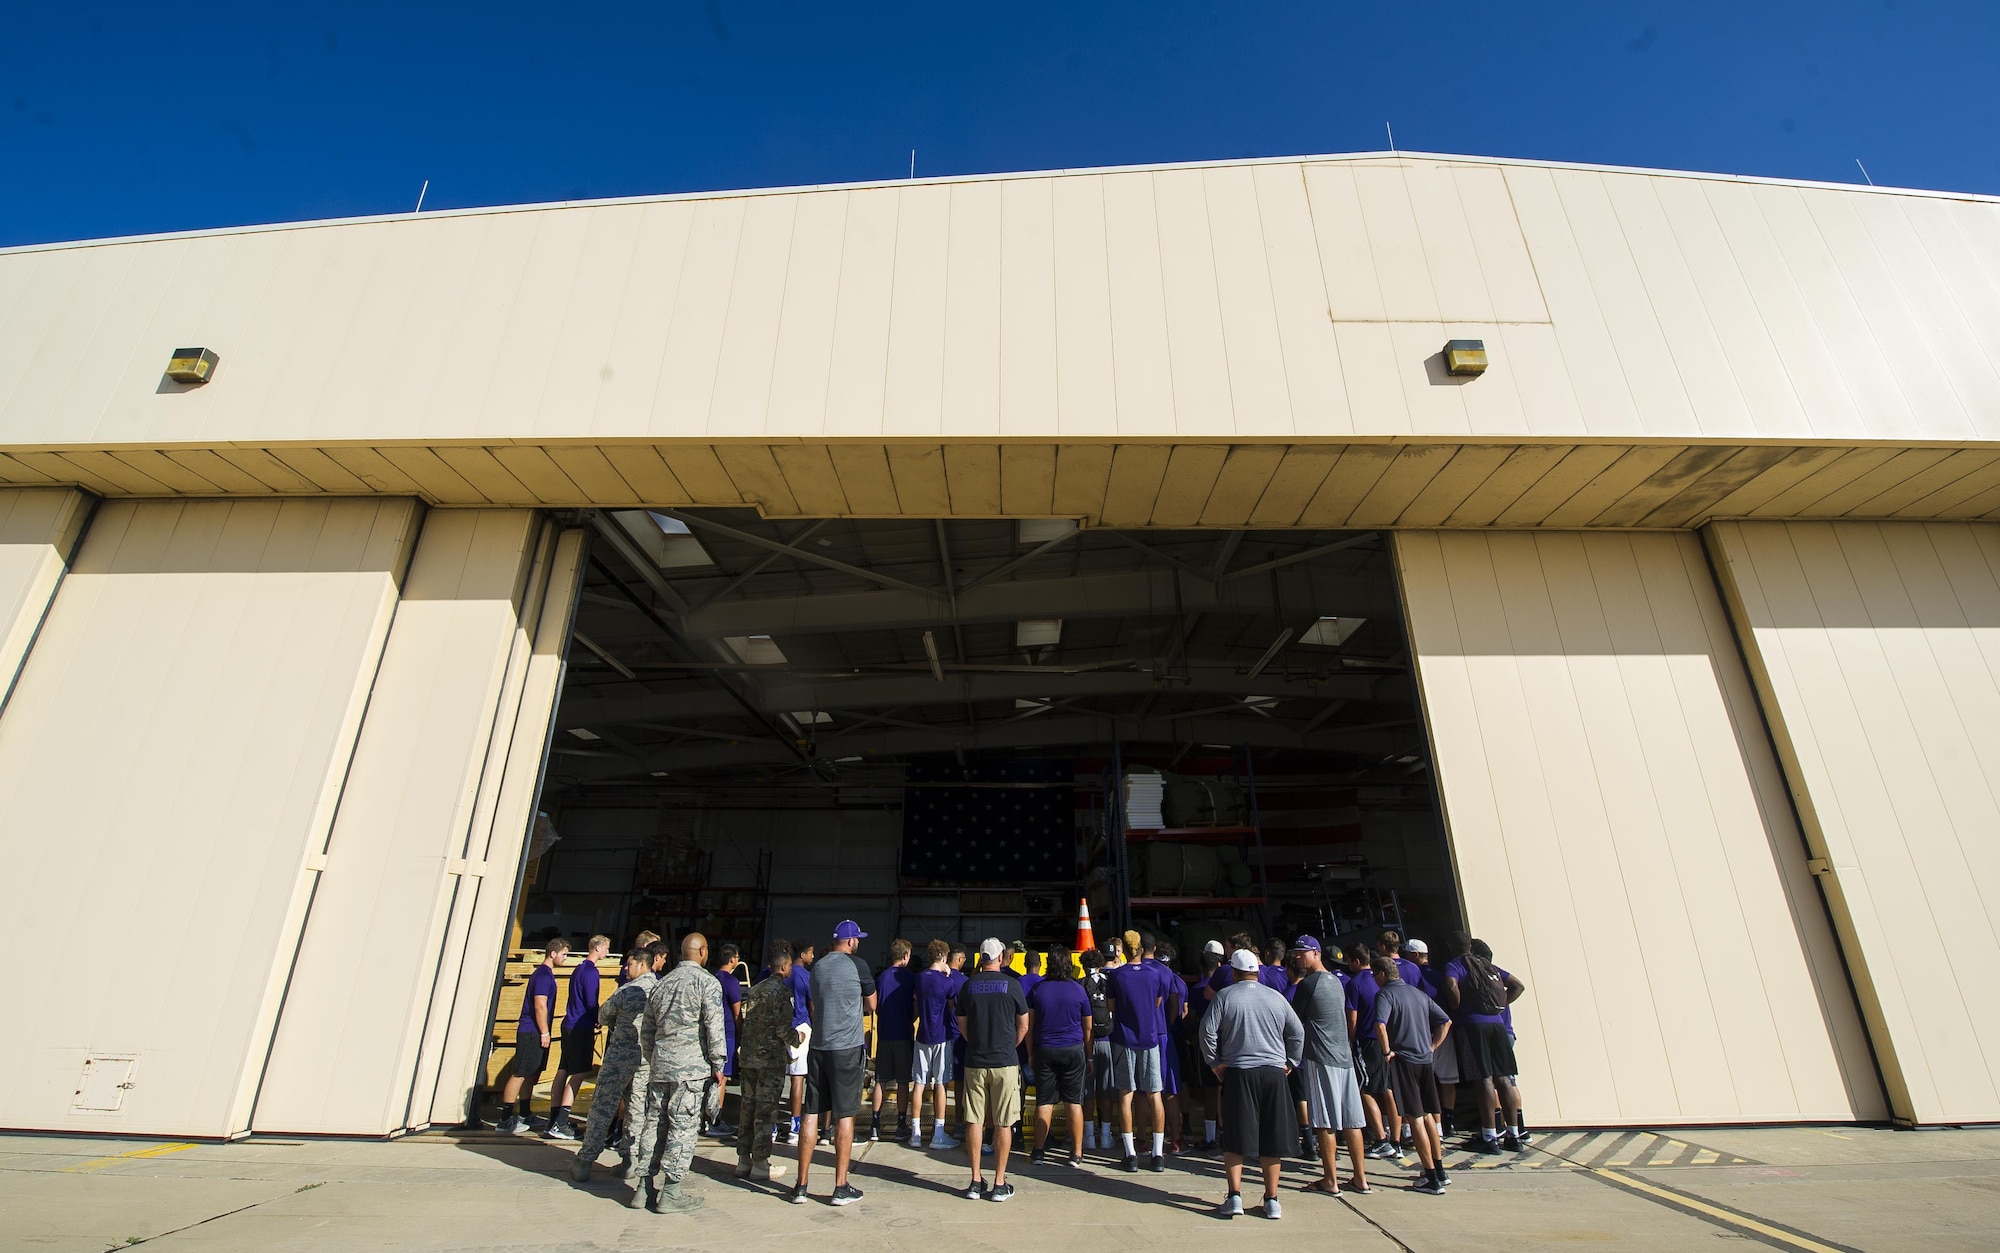 Clovis High School football players crowd around a display set up by the 26th Special Tactics Squadron during the team’s tour at Cannon Air Force Base, NM, July 19, 2017.The football team visited the 26th STS to learn about their job and culture. (U.S. Air Force photo by Senior Airman Lane T. Plummer)